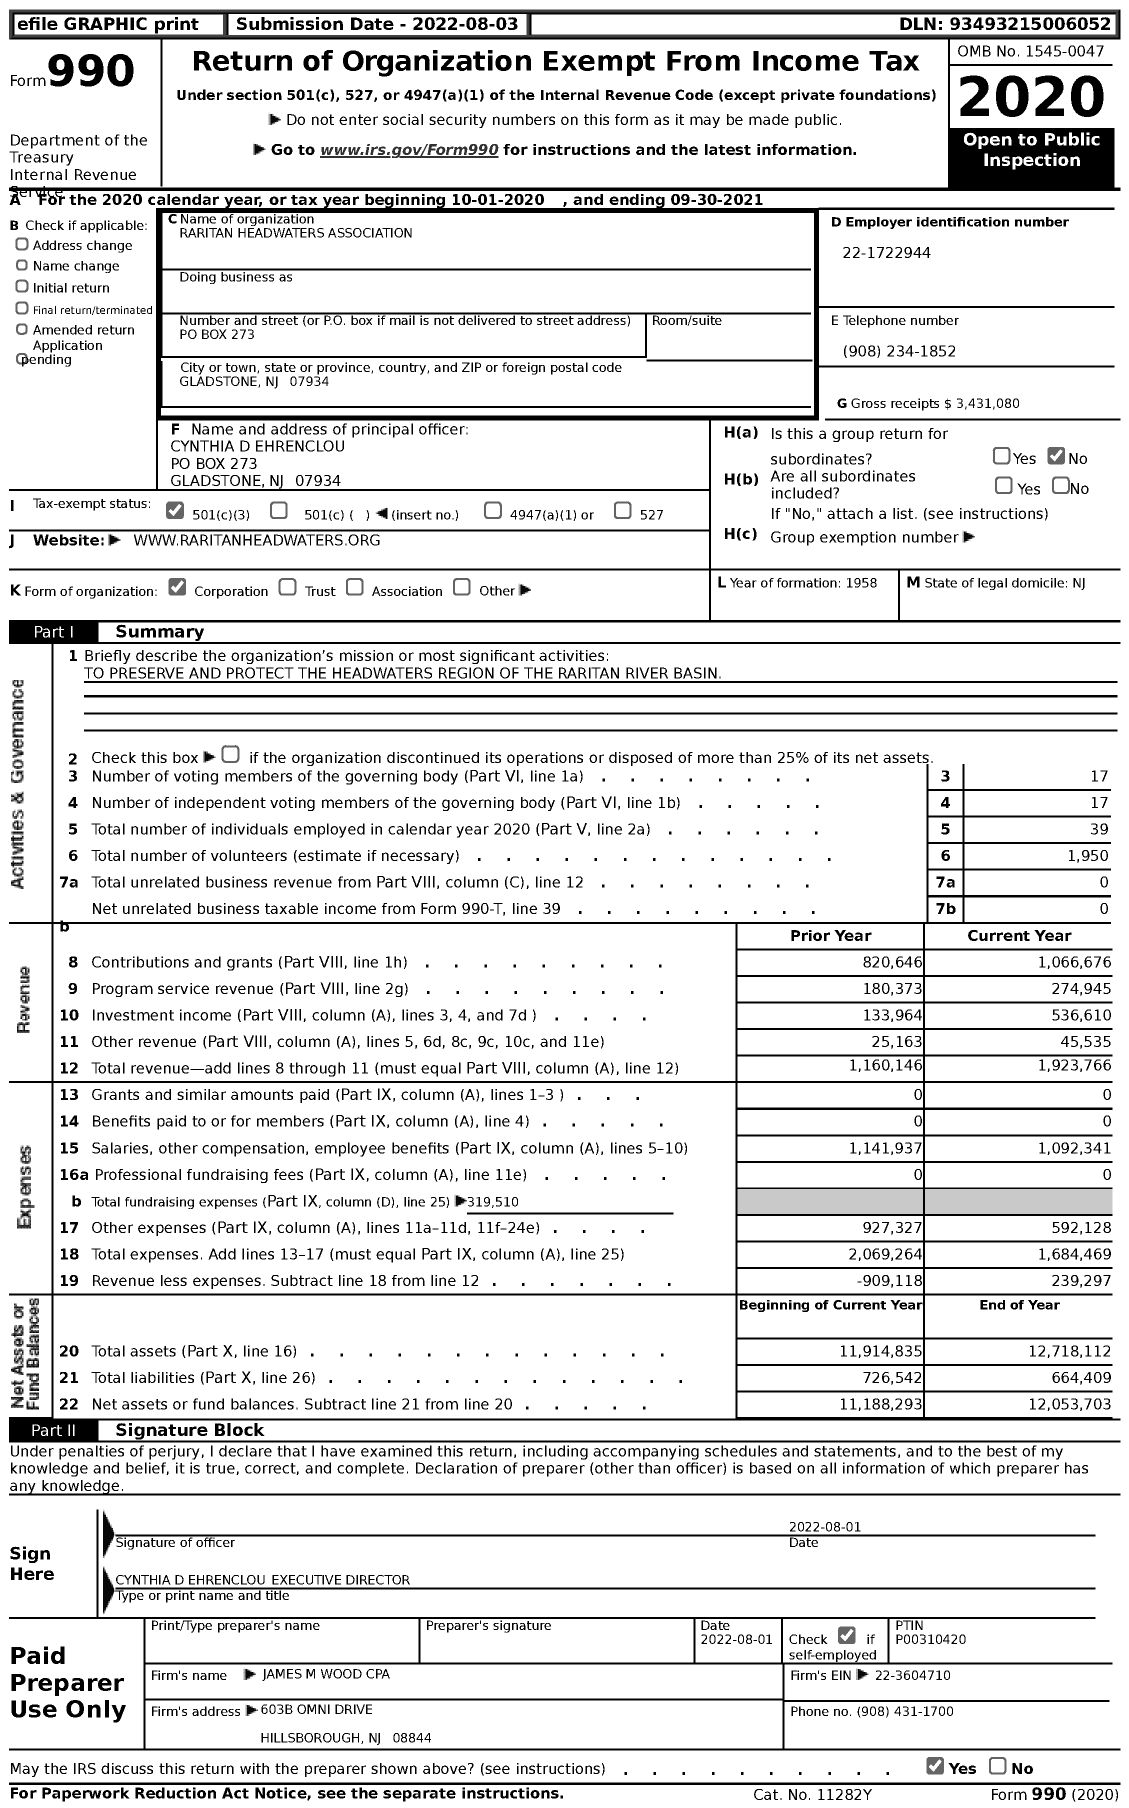 Image of first page of 2020 Form 990 for Raritan Headwaters Association (RHA)